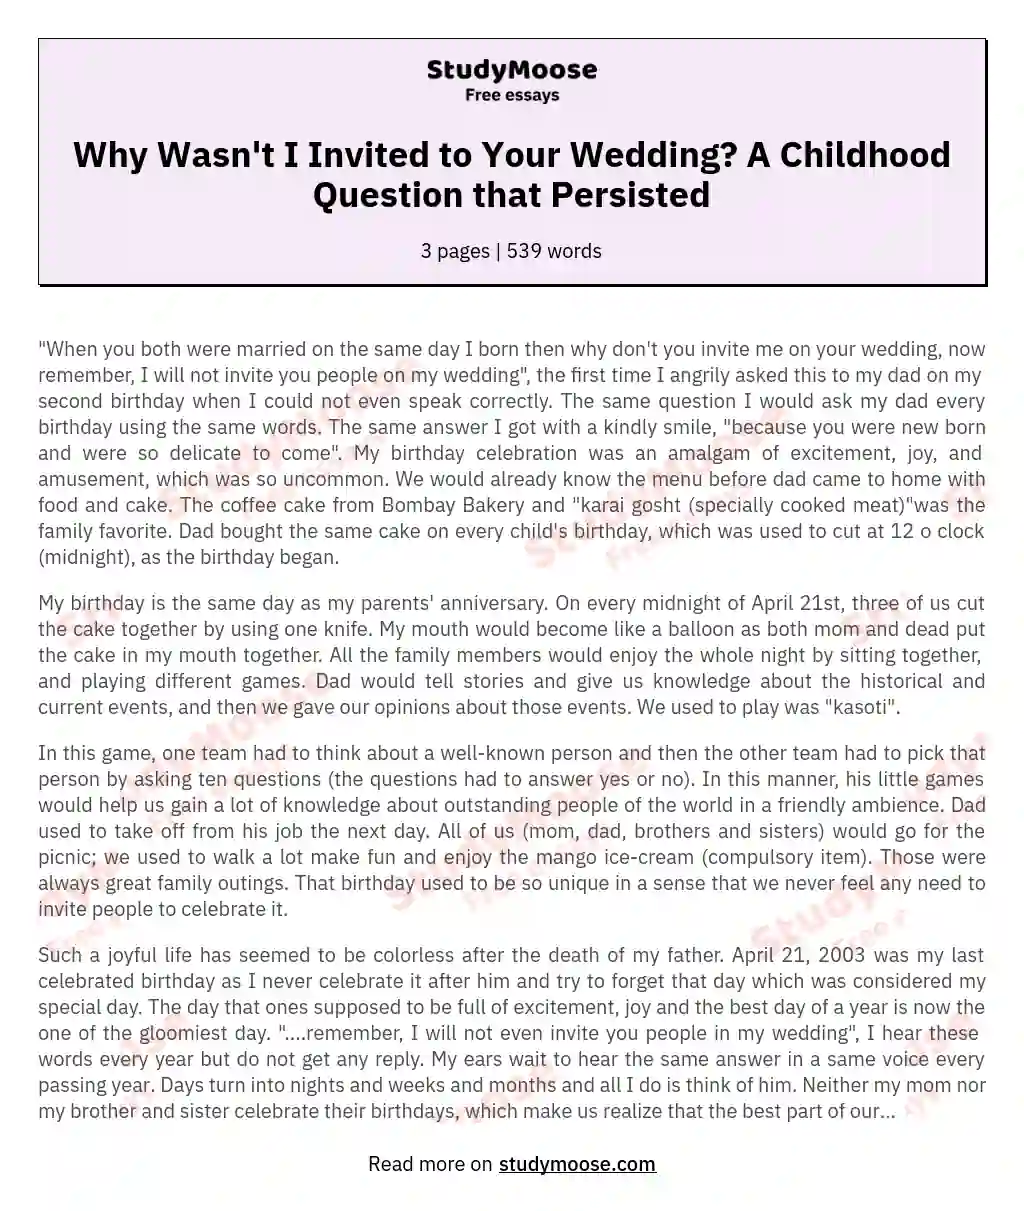 Why Wasn't I Invited to Your Wedding? A Childhood Question that Persisted essay